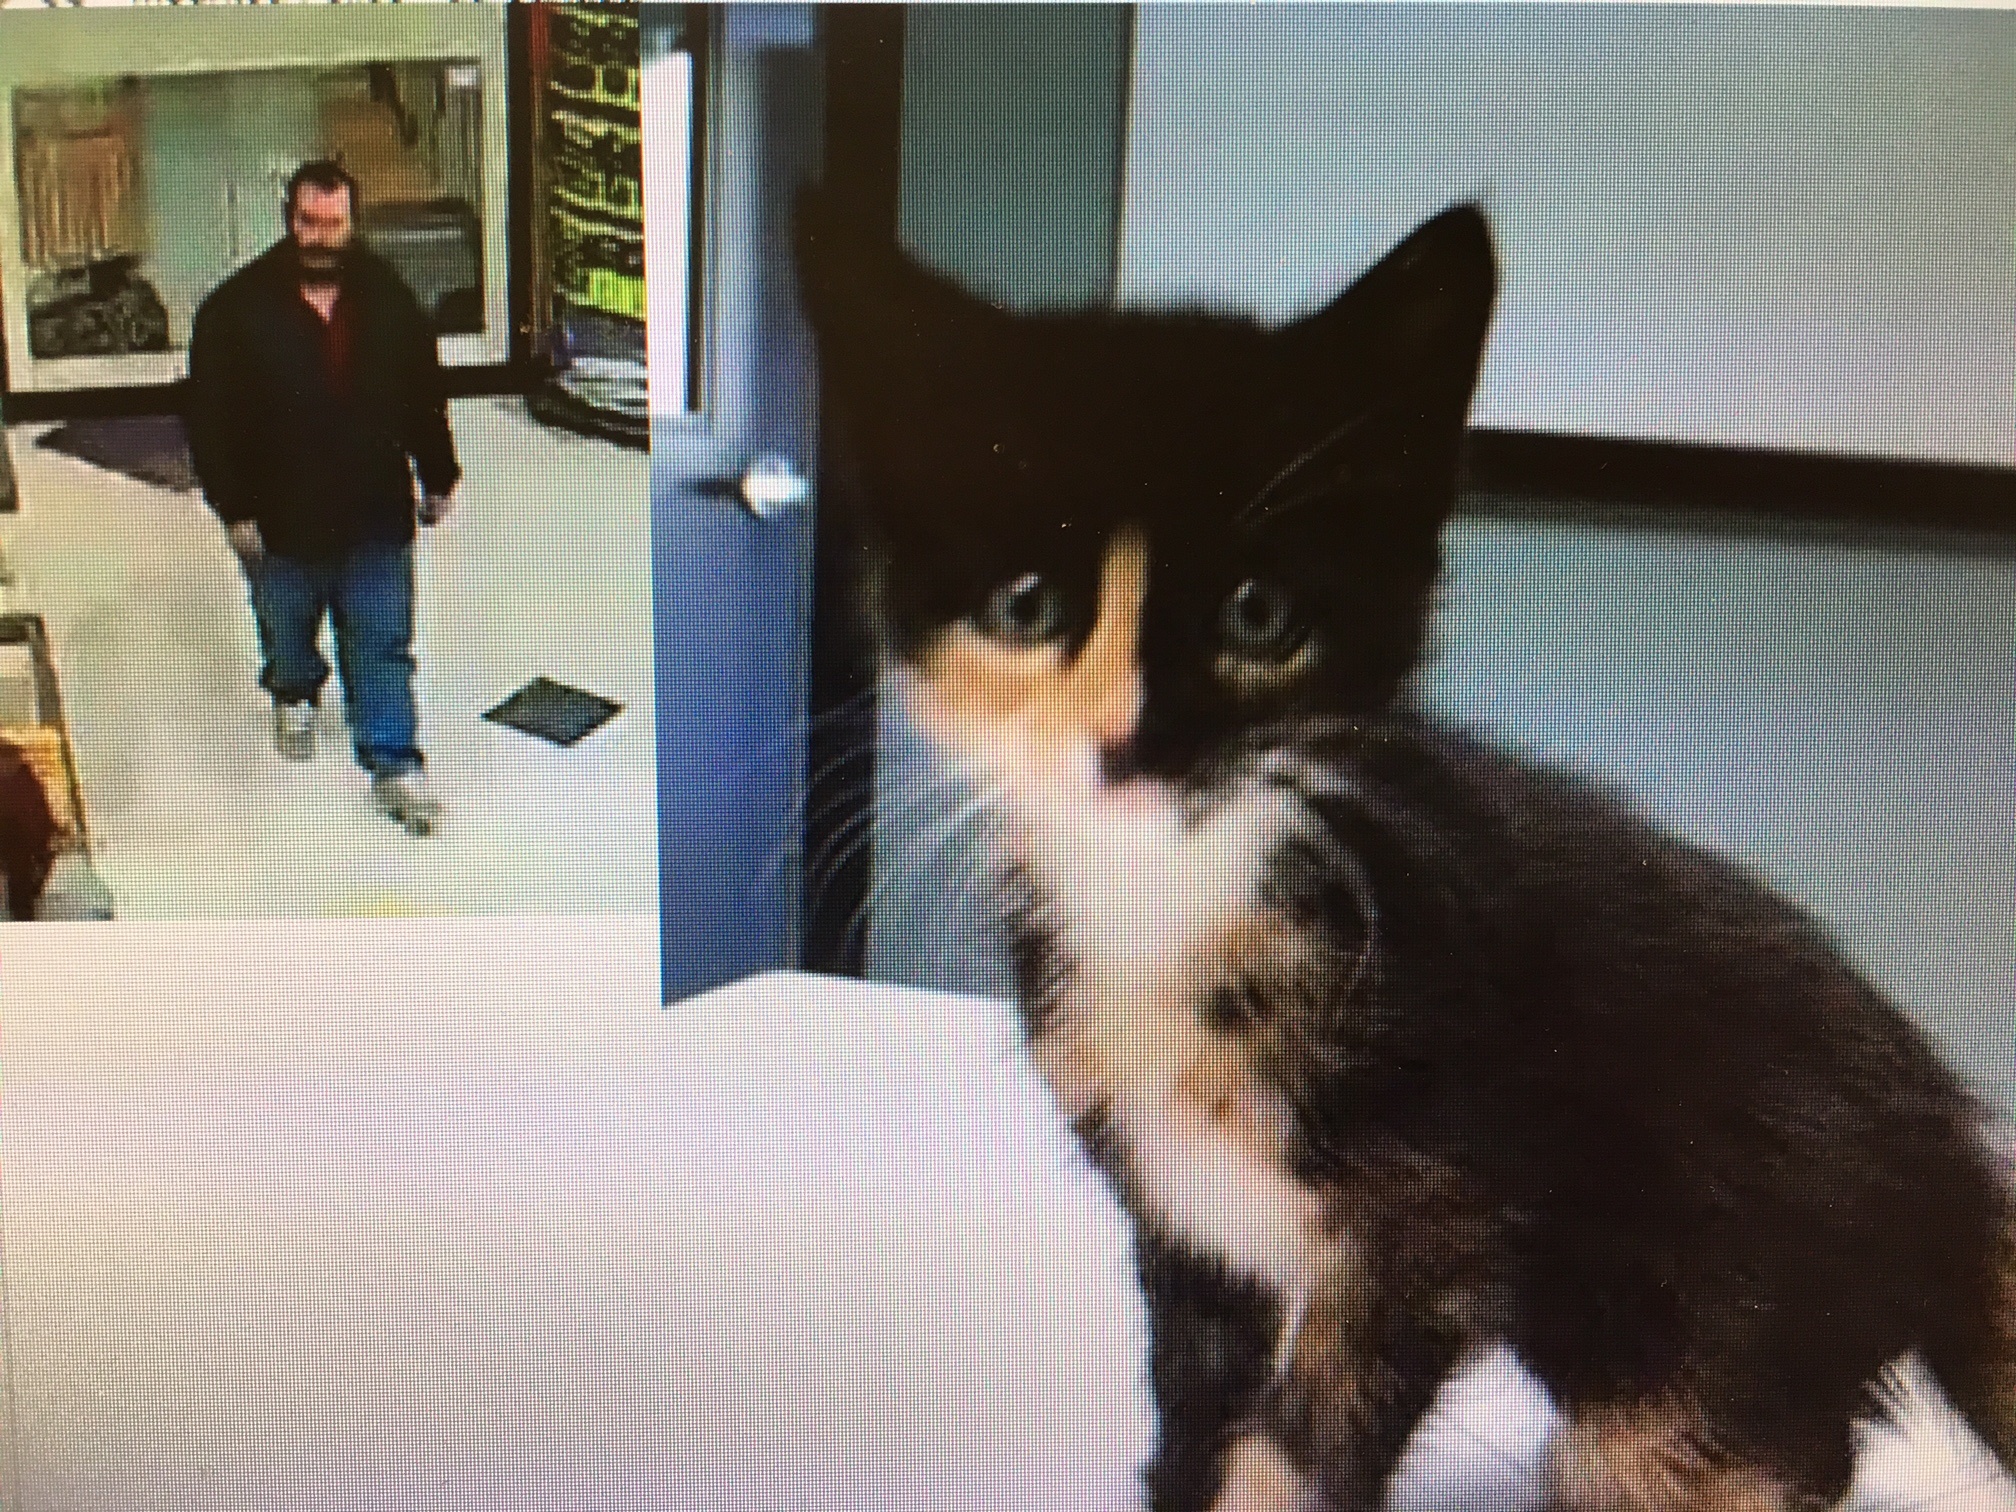 SUSPECT WANTED - Police are searching for a suspect who allegedly stole a kitten with health issues from Petland.